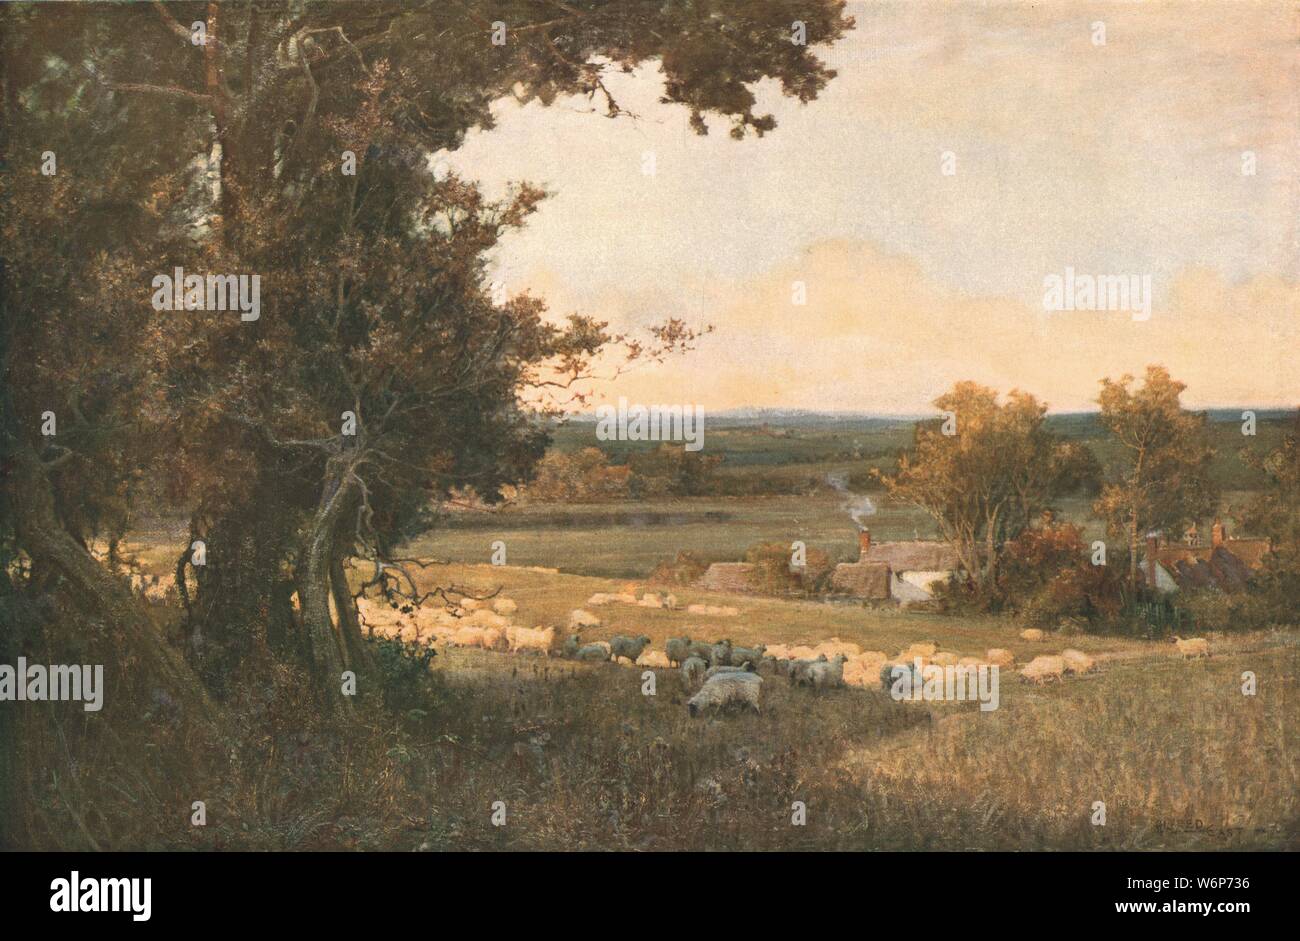 'The Golden Valley', c1893, (c1930). Rural scene, sheep in a field in the glow of early evening, with smoke curling from a cottage chimney. Painting in the Leeds Art Gallery, Leeds, Yorkshire. From &quot;Modern Masterpieces of British Art&quot;. [The Amalgamated Press Ltd., London, c1930] Stock Photo